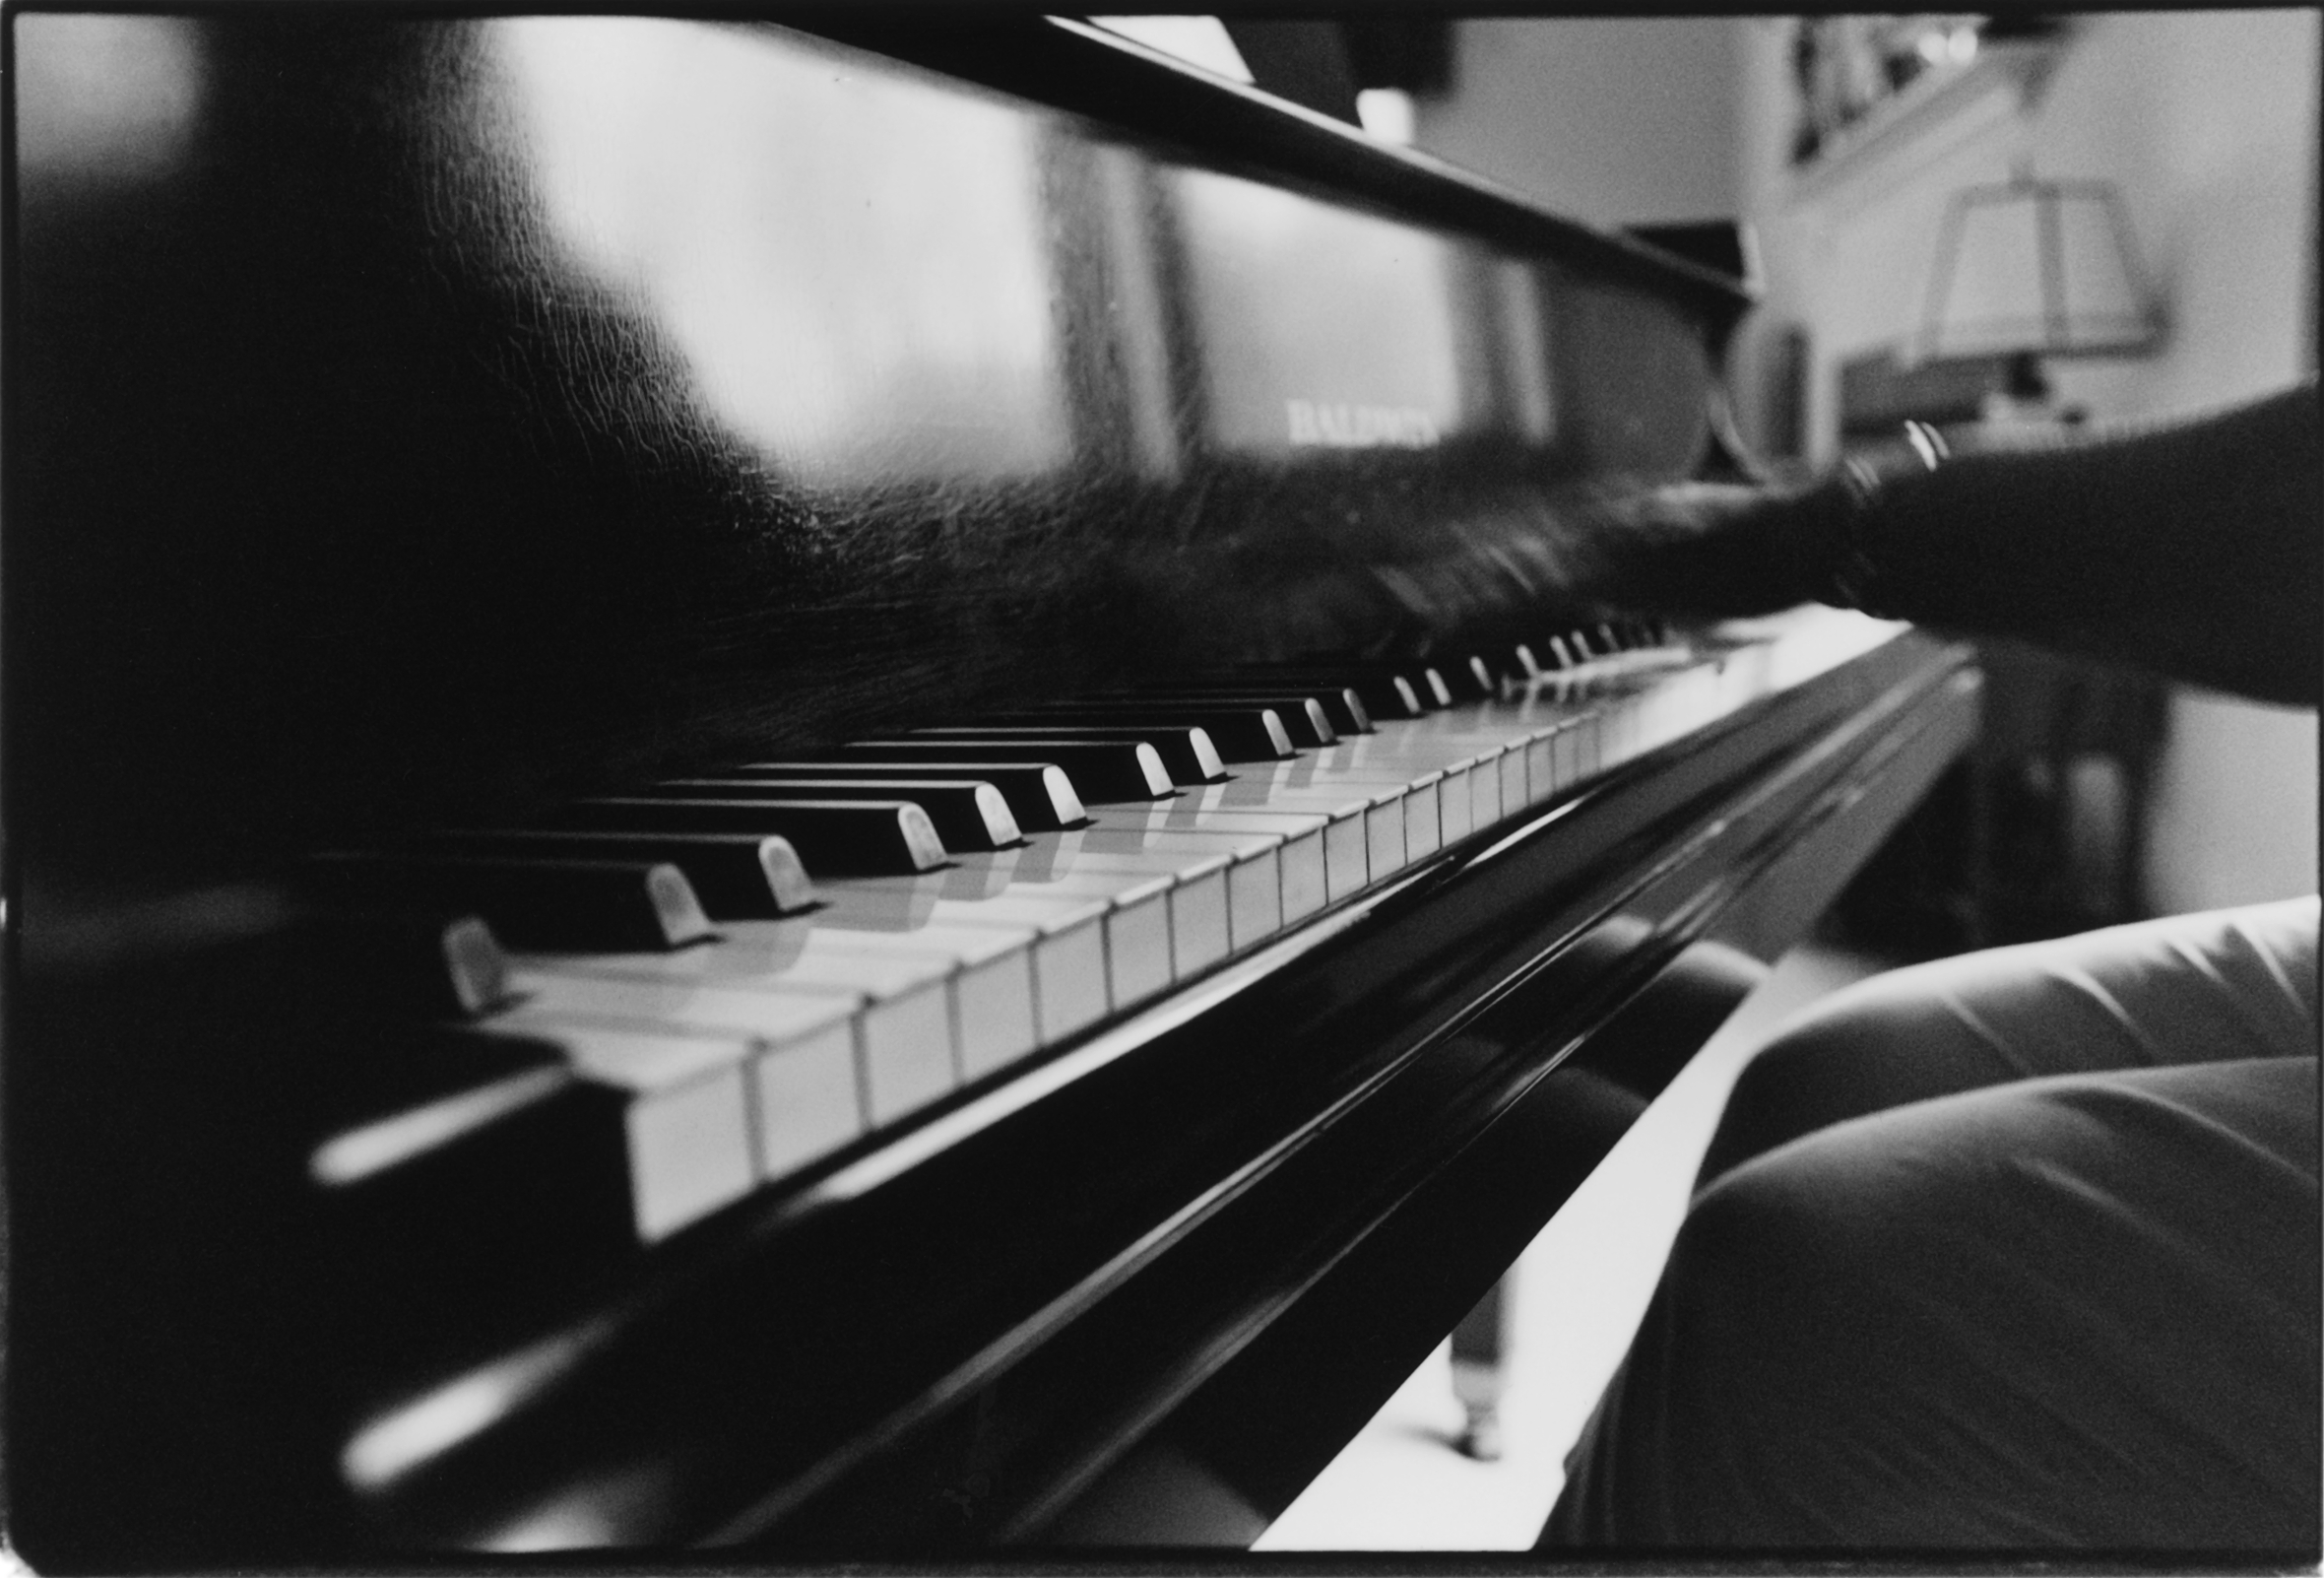 Close-up of a piano and the hands and knees of the person playing it.